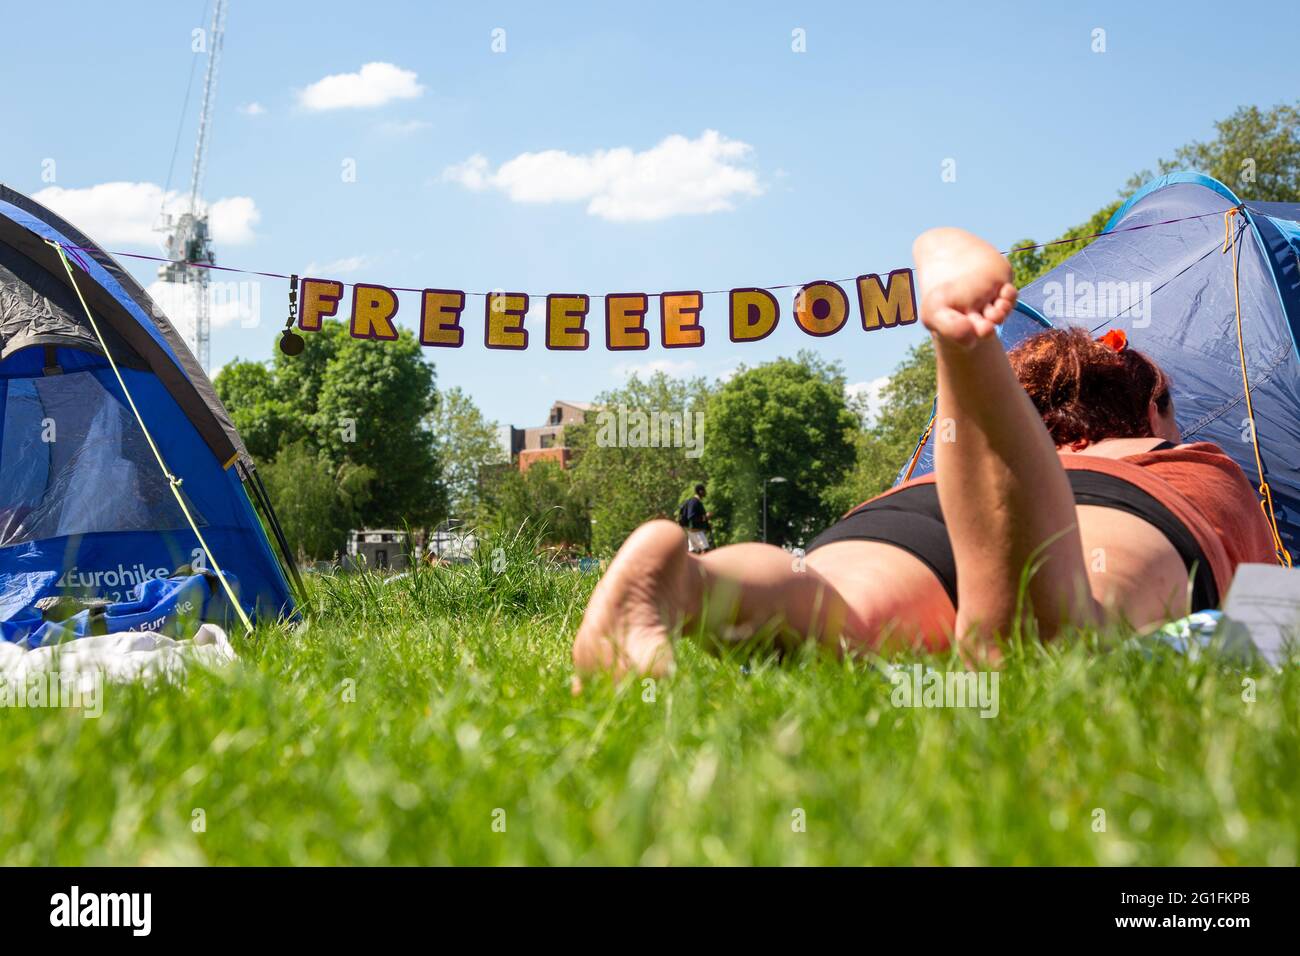 A young woman chilling in the grass at a freedom protest on Shepherd's Bush Green, London, UK. May 2021 Stock Photo